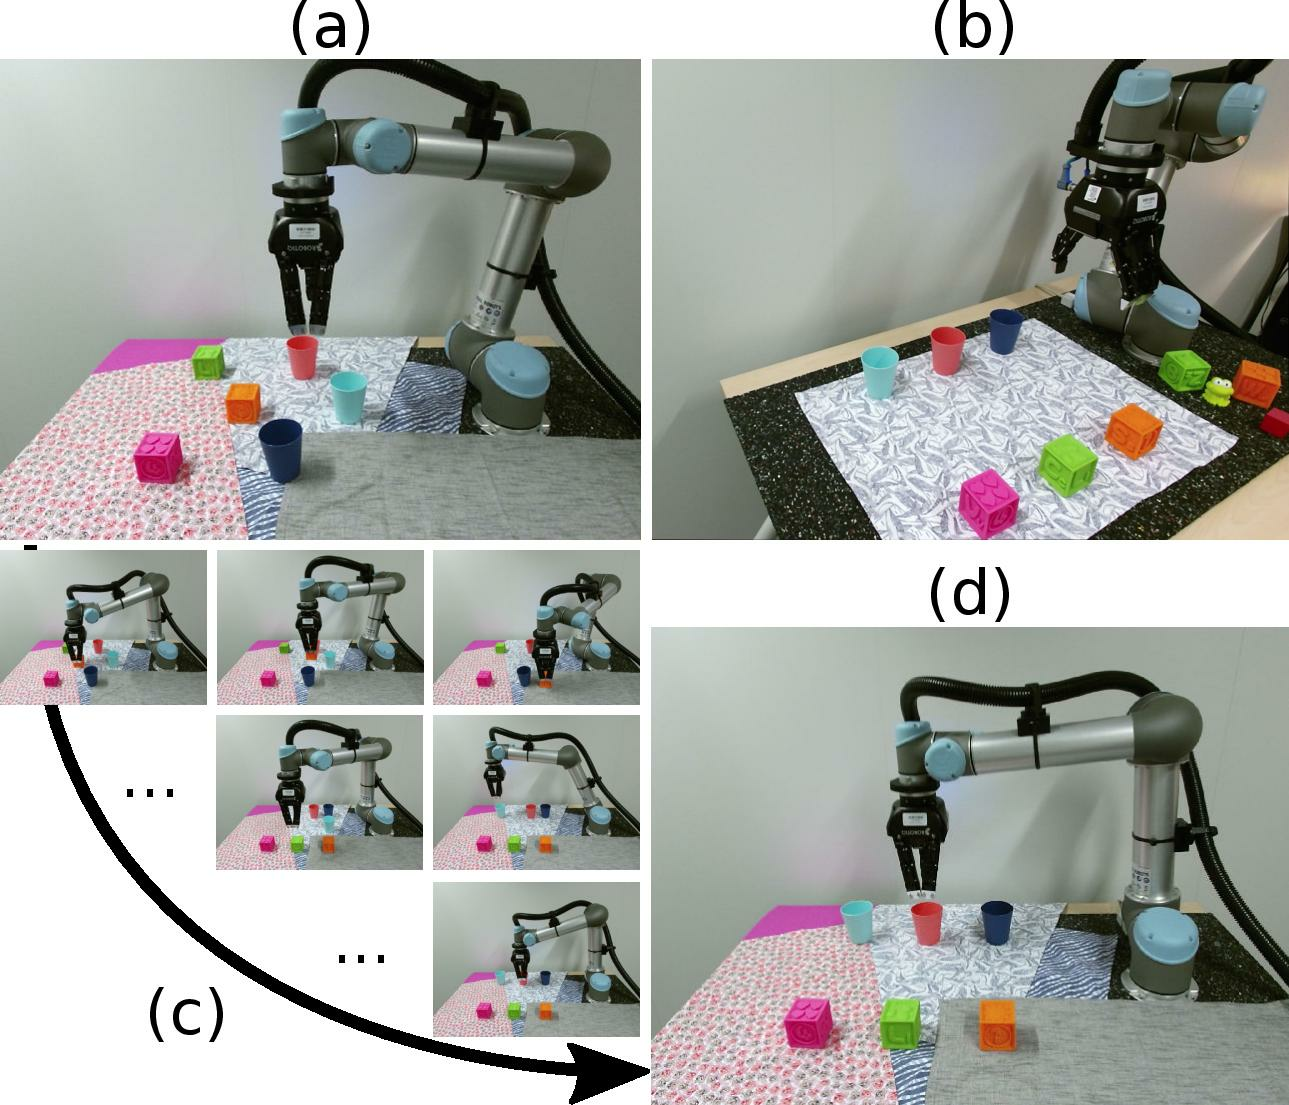 Visually guided rearrangement planning.  Given a source (a) and target (b)
RGB images depicting a robot and multiple movable objects,
our approach estimates the positions of objects in the scene without the need for explicit camera calibration and efficiently finds a sequence of
robot actions (c) to re-arrange the scene into the target
scene. Final object configuration after re-arrangement by the robot is shown in (d).